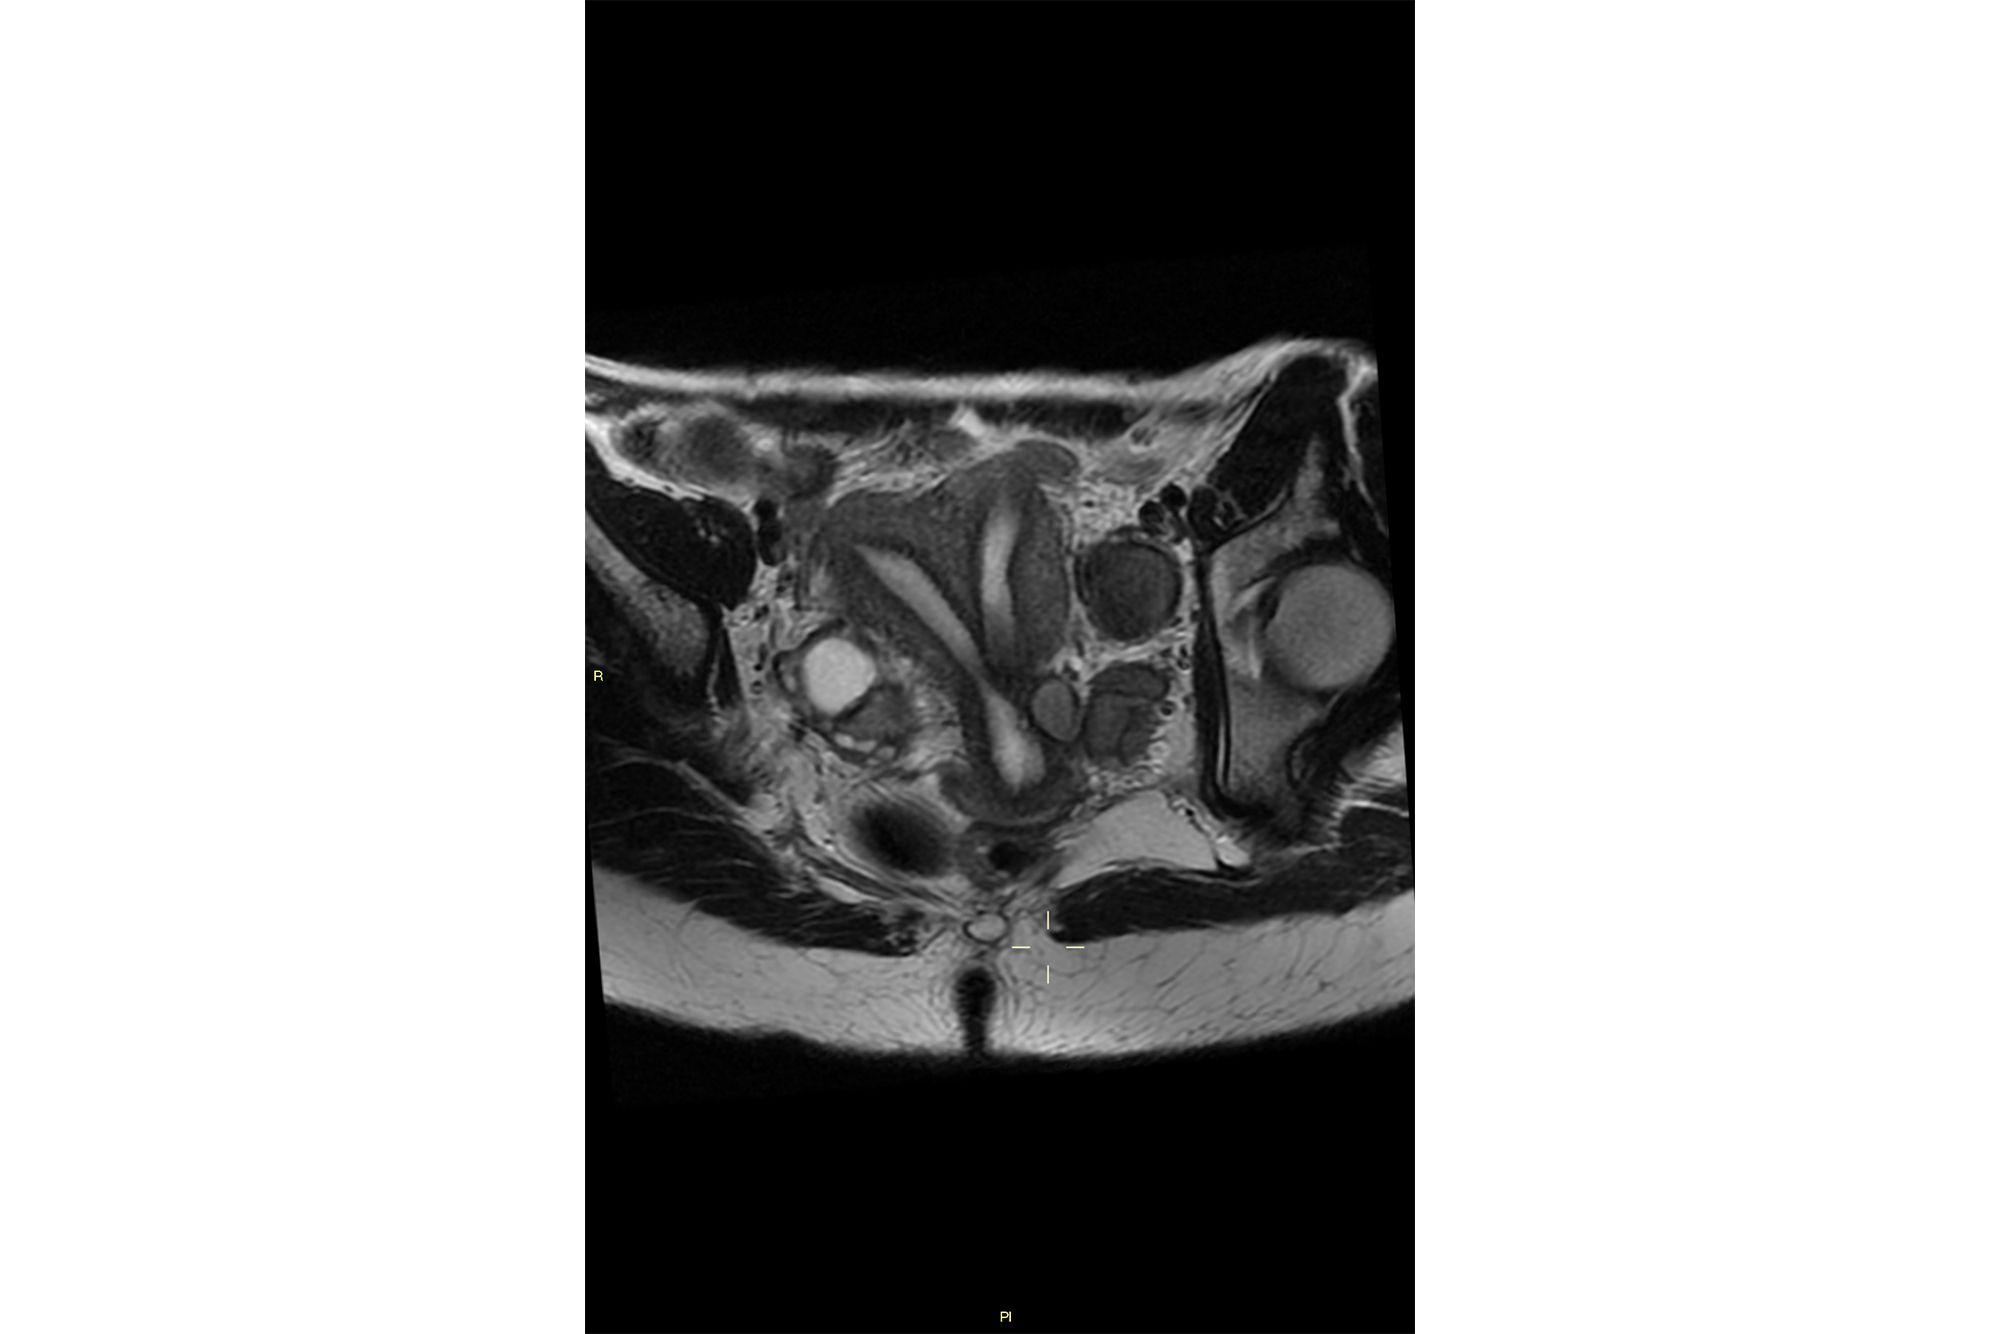 Septate uterus long axis T2